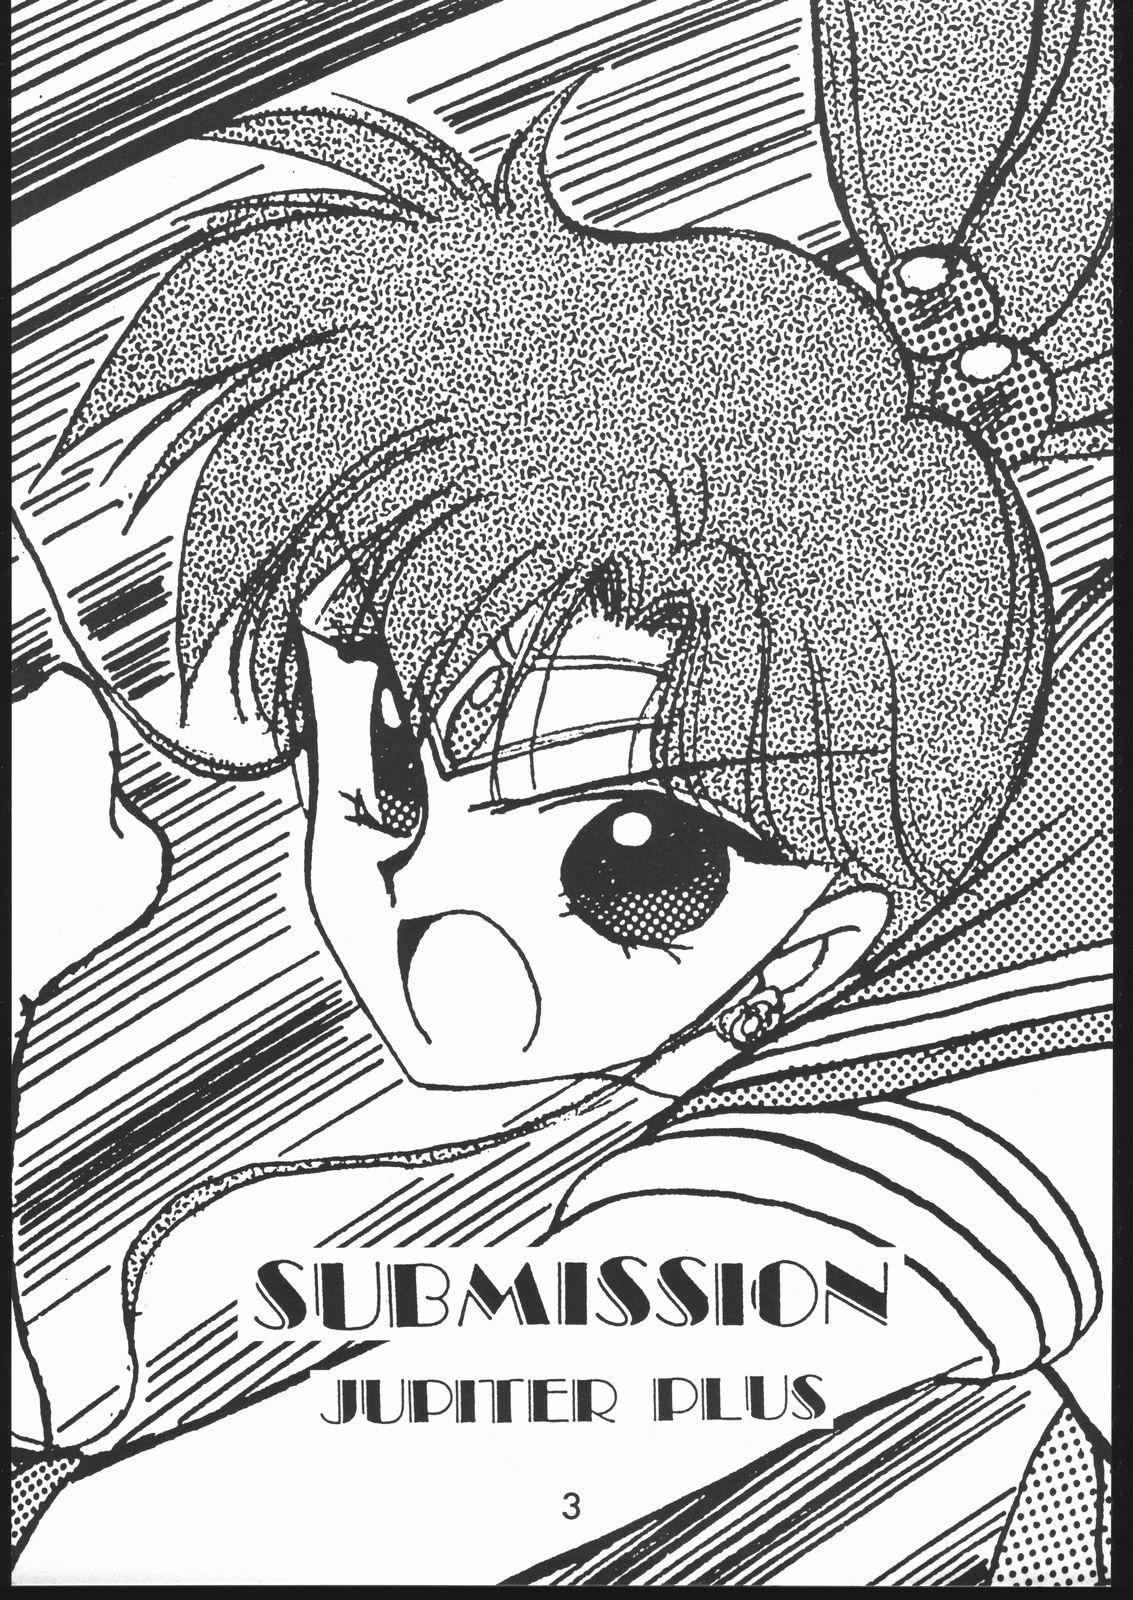 Grande SUBMISSION JUPITER PLUS - Sailor moon Lady - Page 2